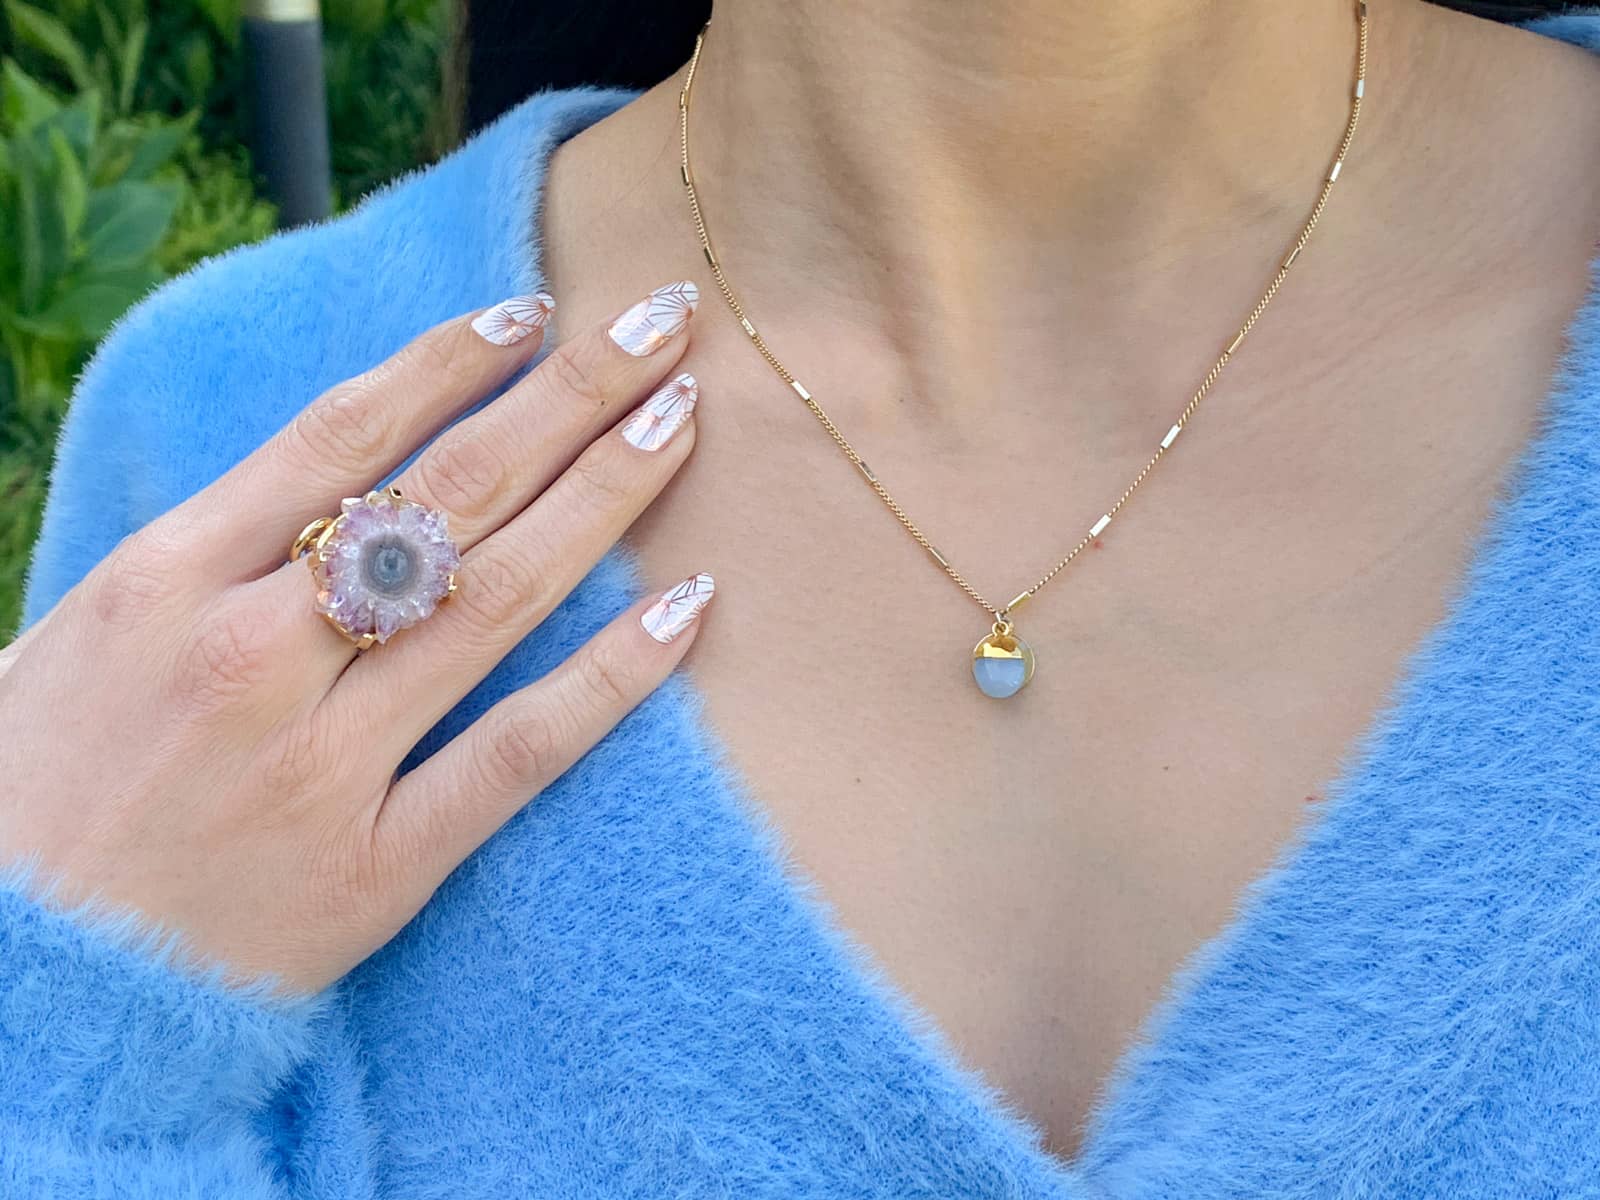 A close-up of a woman’s neckline; she is wearing a gold necklace with a blue gemstone that matches the blue cardigan she is wearing. Her hand is resting on her collarbone, and her fingernails have white nail art with rose gold sunburst patterns. She is wearing a raw amethyst ring on her middle finger.